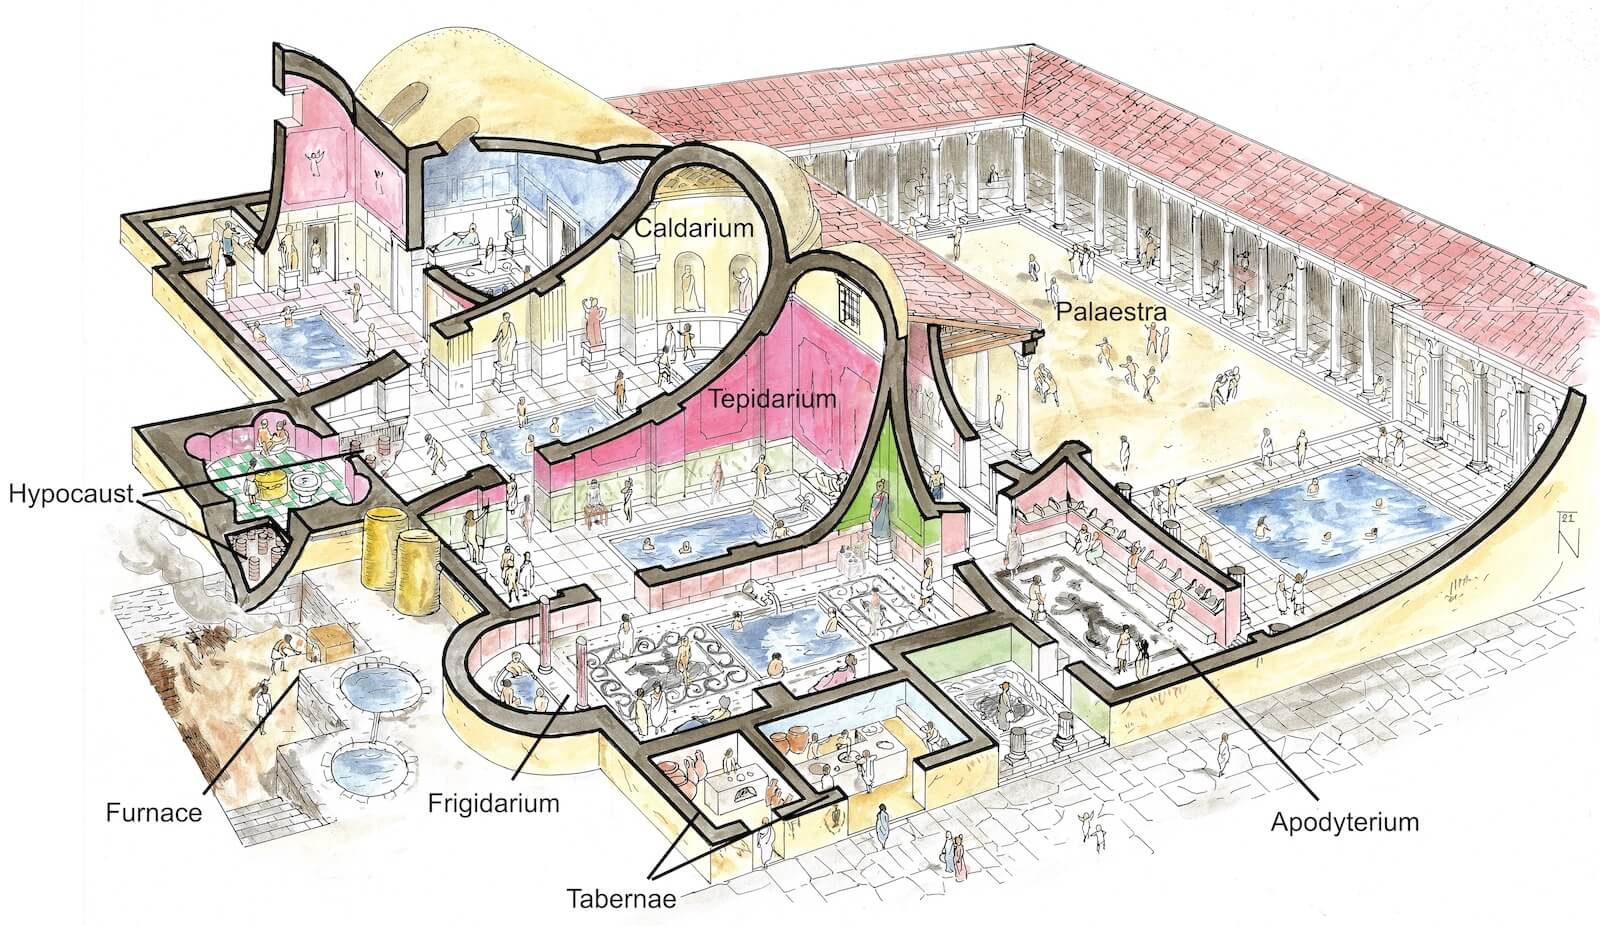 A Typical Roman Public Bathhouse. Drawn by Yannis Nakas for the Author.